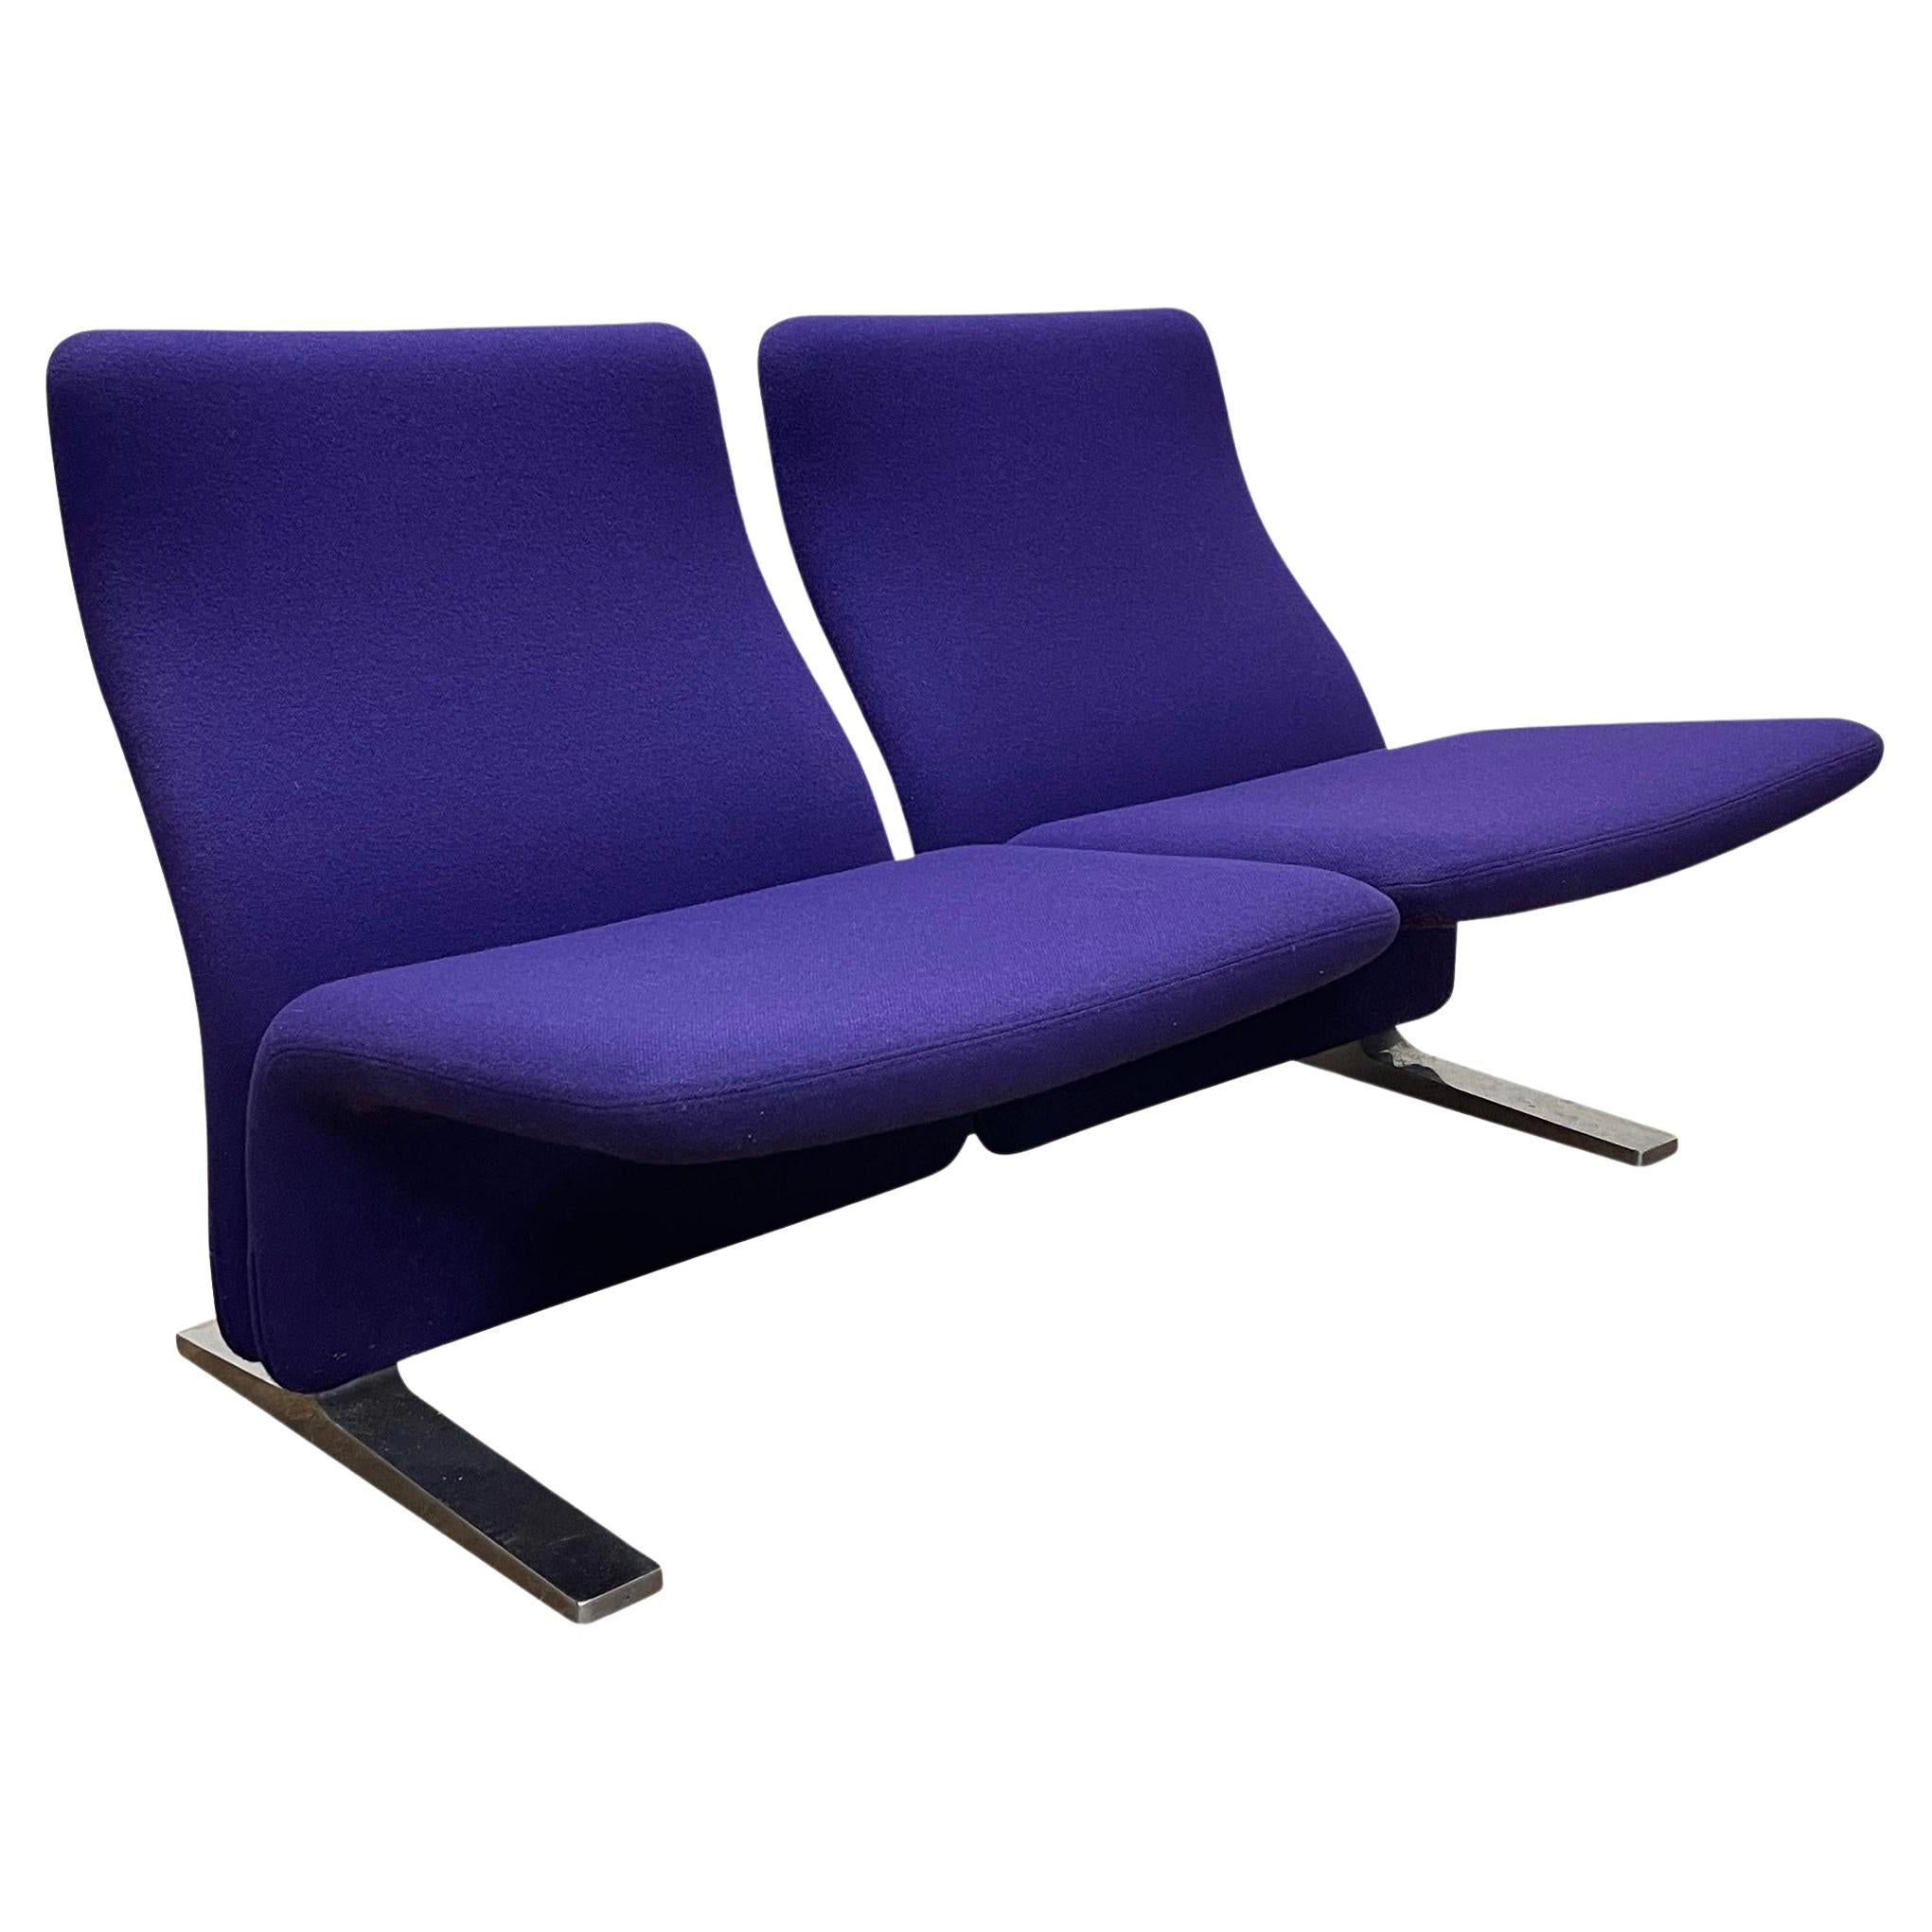  F784 Two Seat Loveseat Sofa by Pierre Paulin for Artifort, Circa 1970s